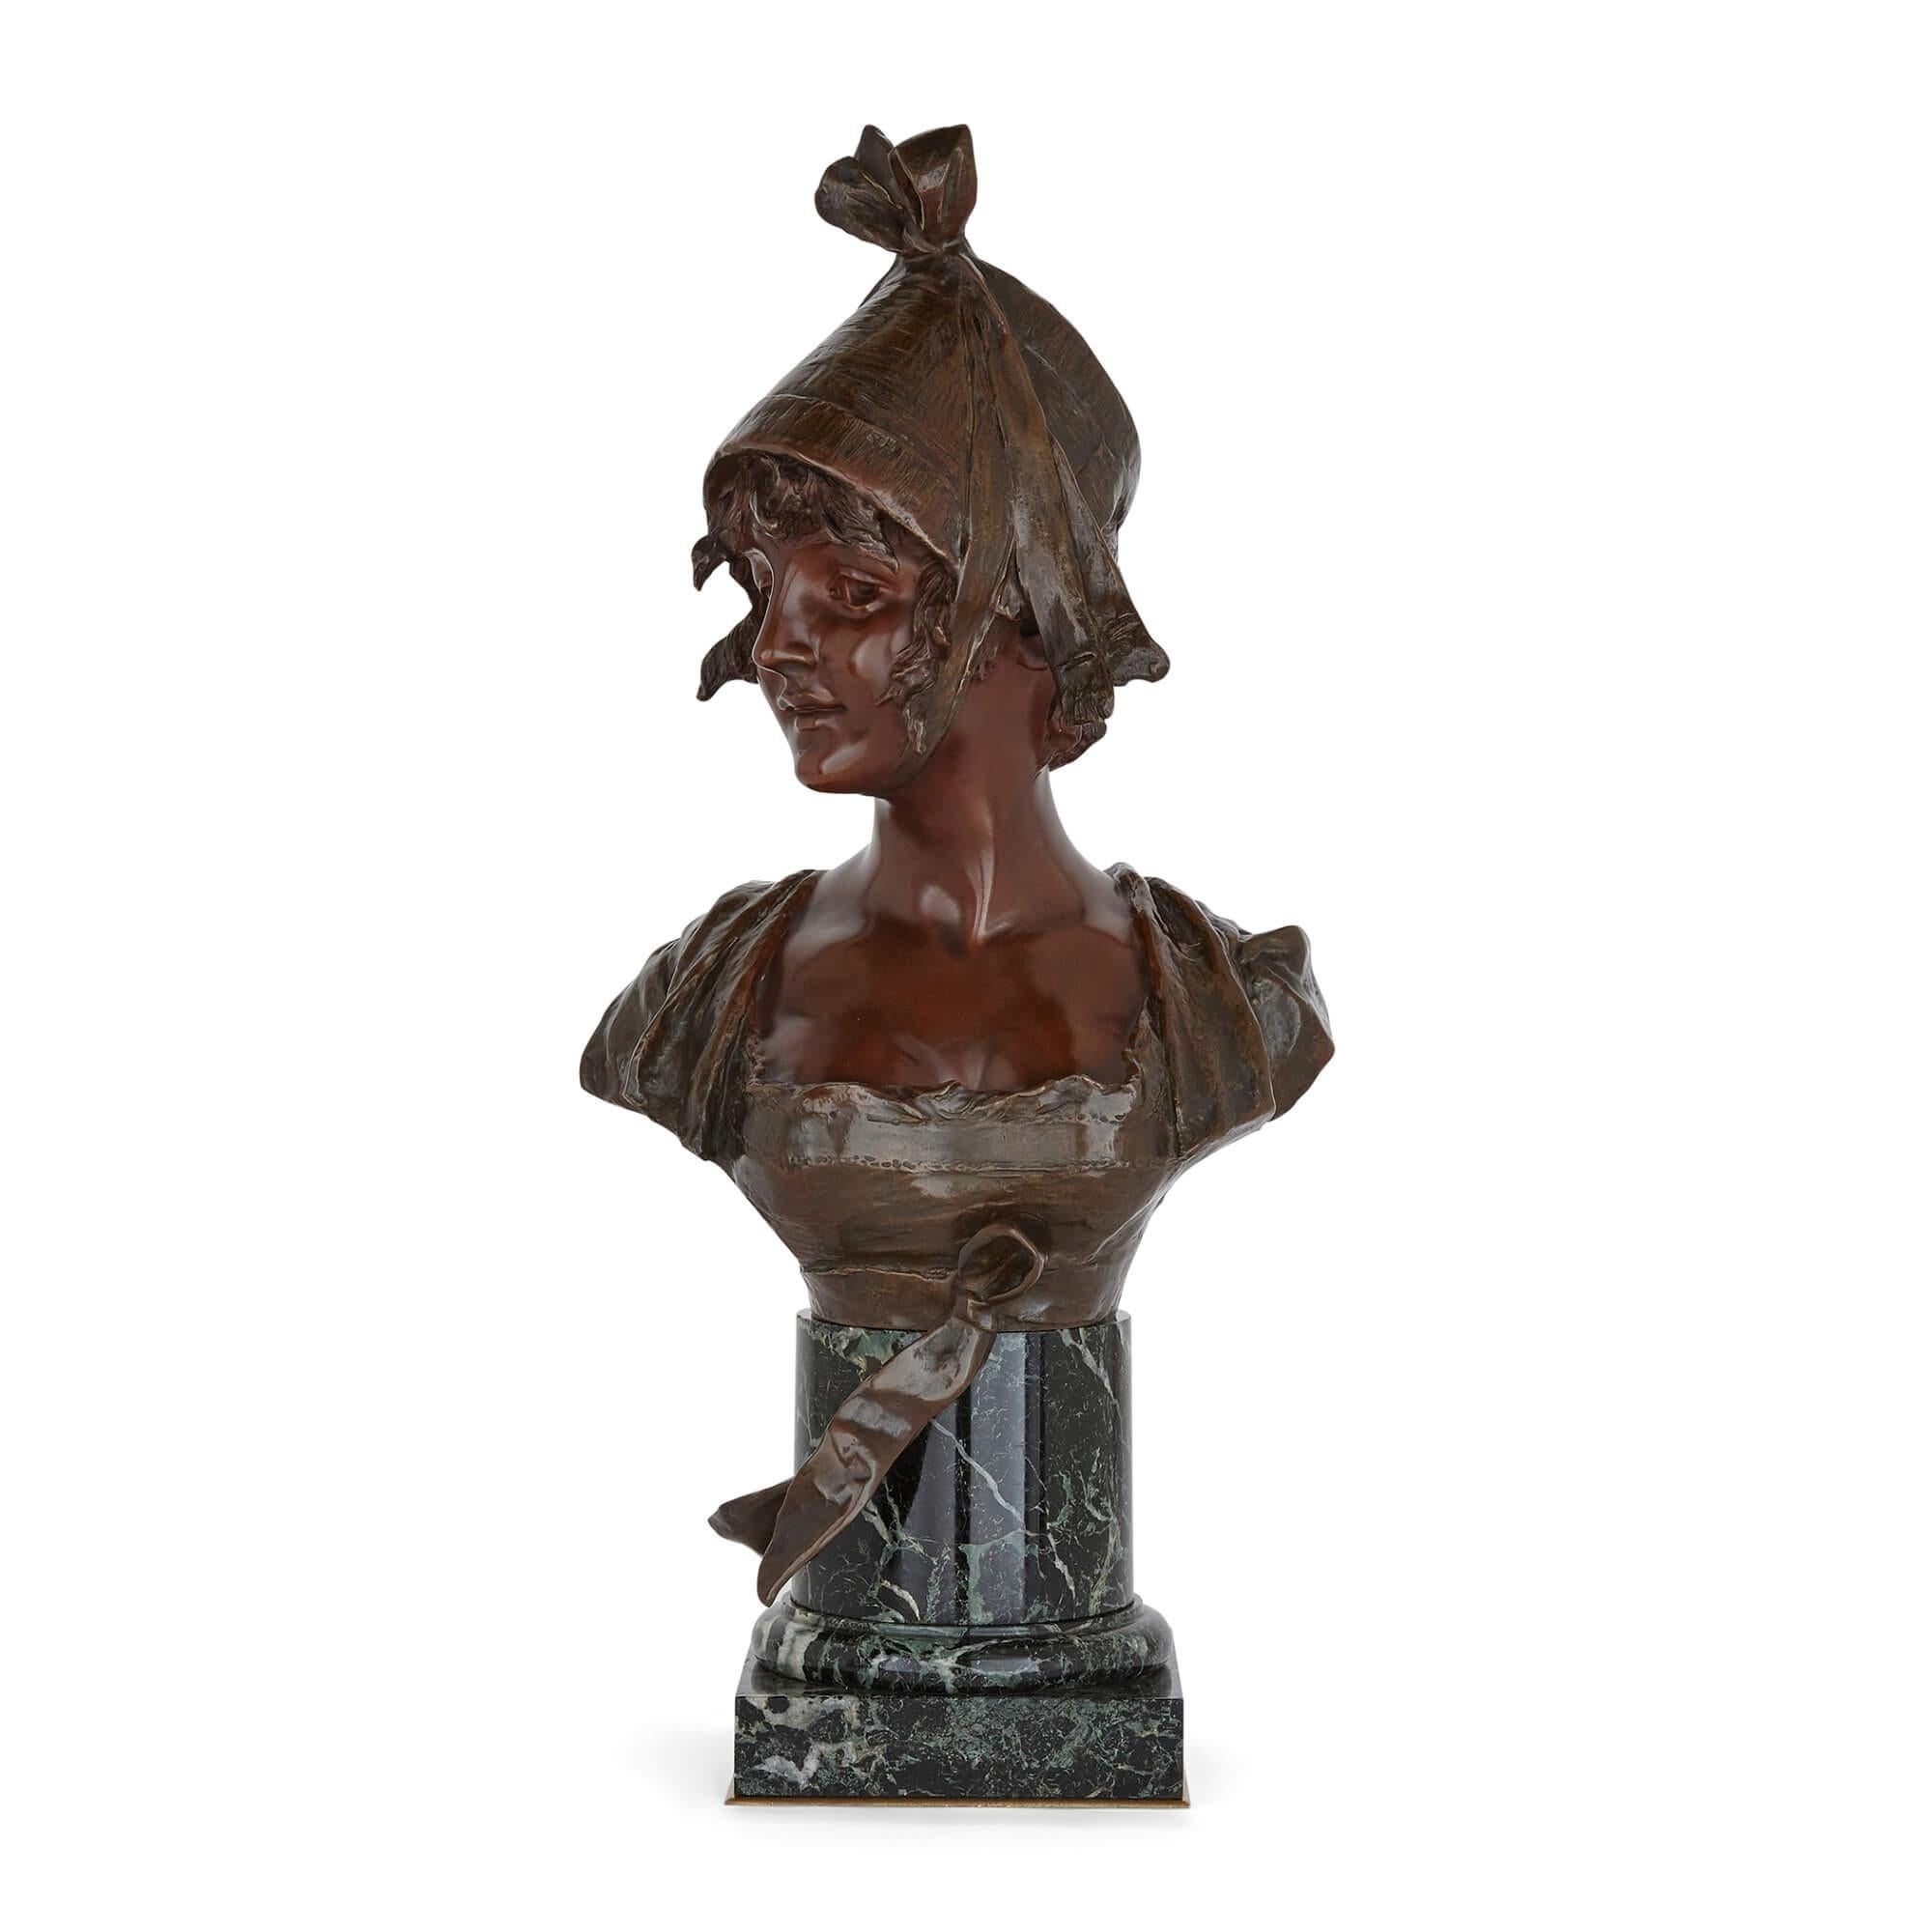 Bronze bust on marble plinth by Georges van der Straeten
Belgian, c. 1900
Measures: Height 69cm, width 34cm, depth 21cm

This beautiful portrait bust is by the Belgian sculptor Georges van der Straeten. The bust depicts in patinated bronze a